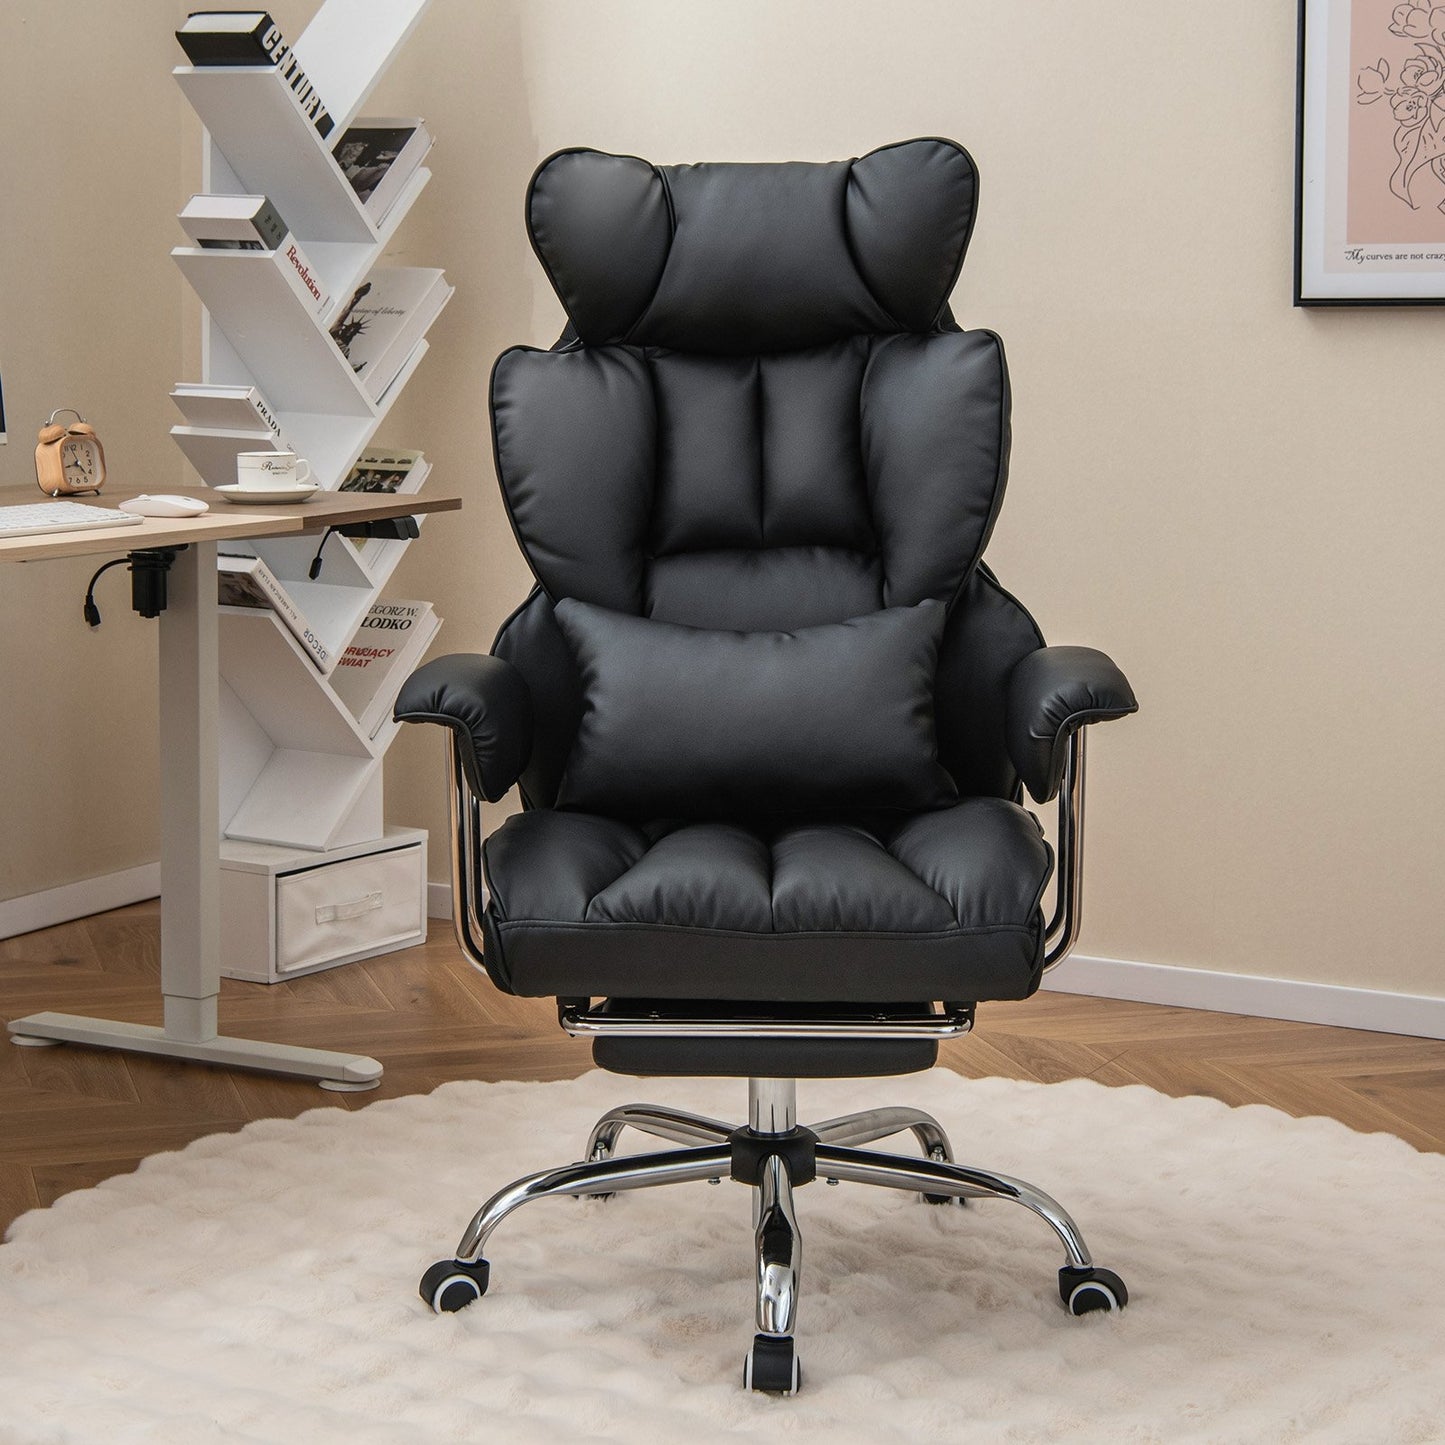 Adjustable Swivel Office Chair with Reclining Backrest and Retractable Footrest, Black